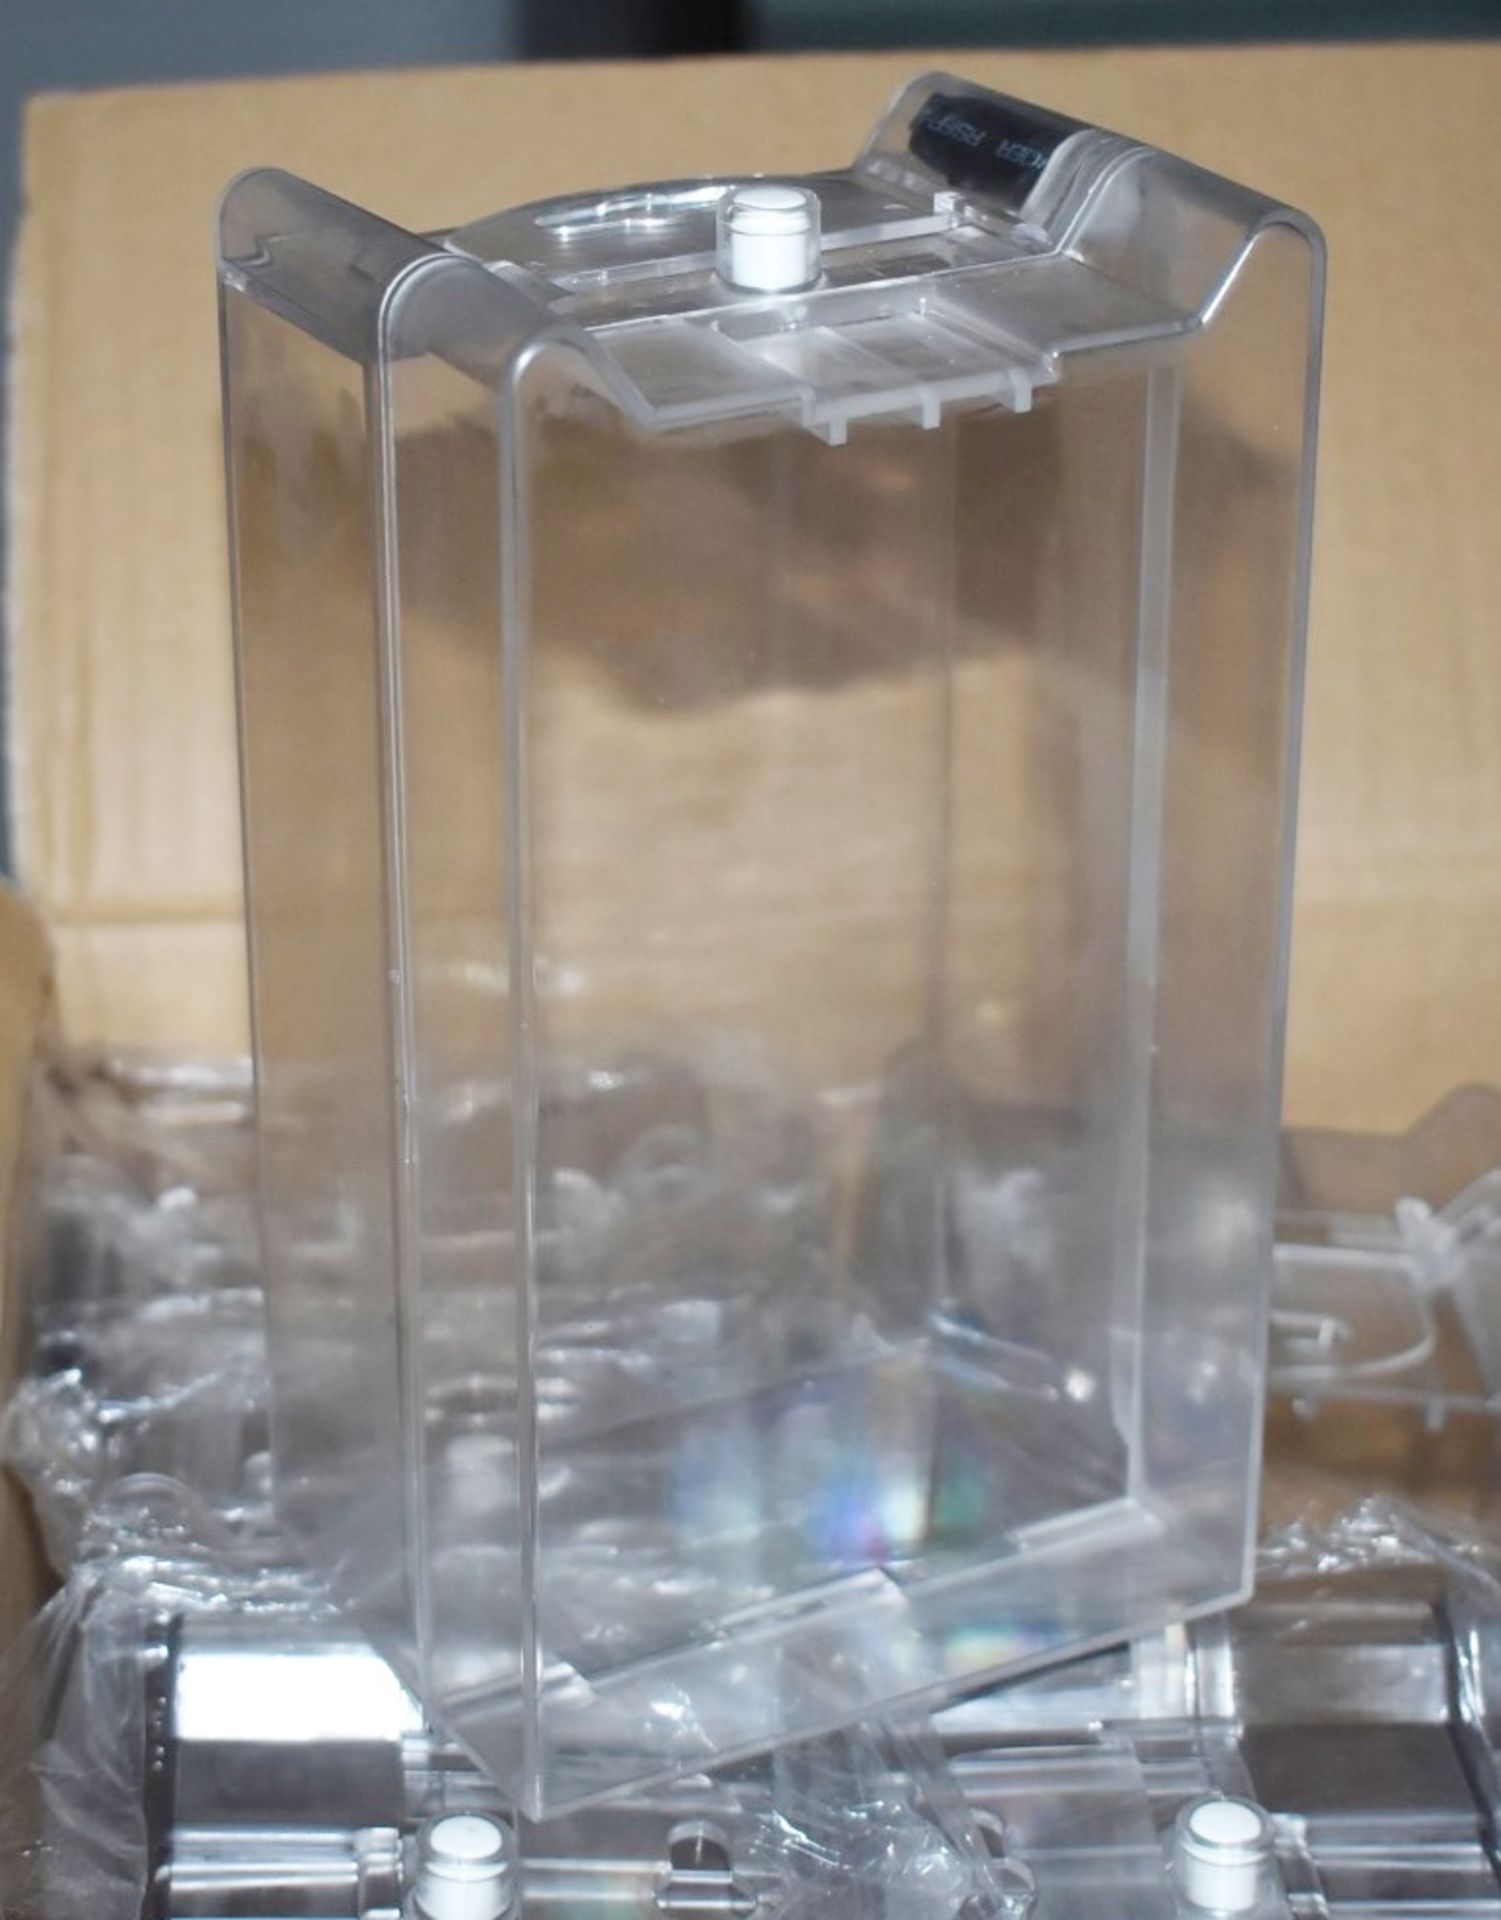 80 x Catalyst Clear Acrylic Retail Security Safer Cases With RF Tags and Hanging Tags - Brand New - Image 9 of 9